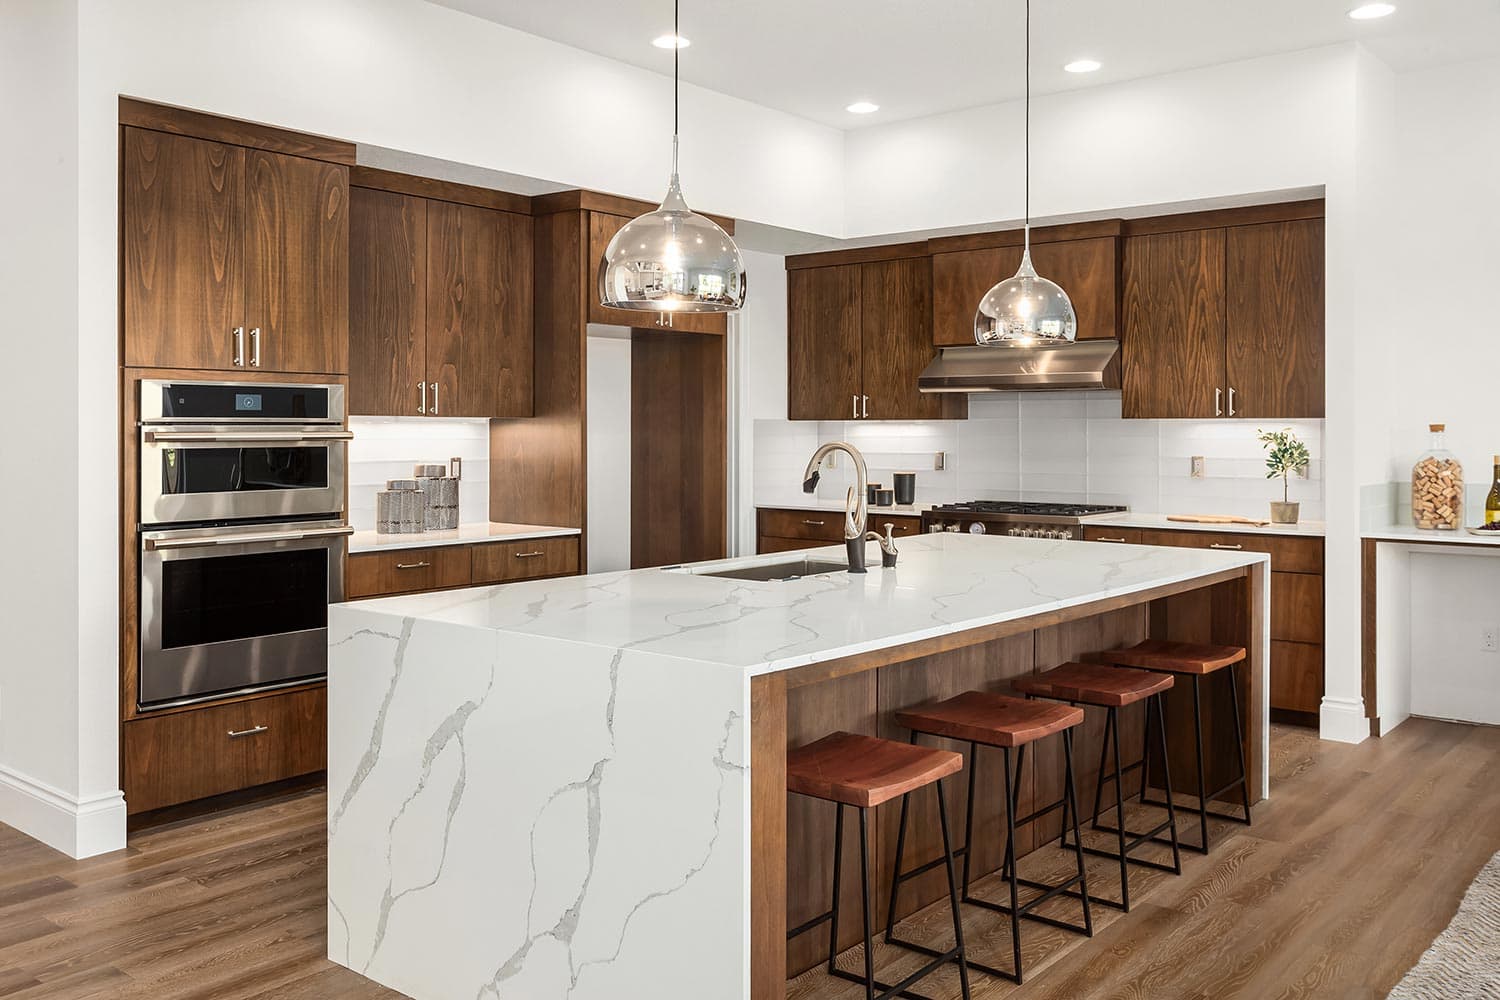 Beautiful kitchen in new luxury home with island, pendant lights, and hardwood floors